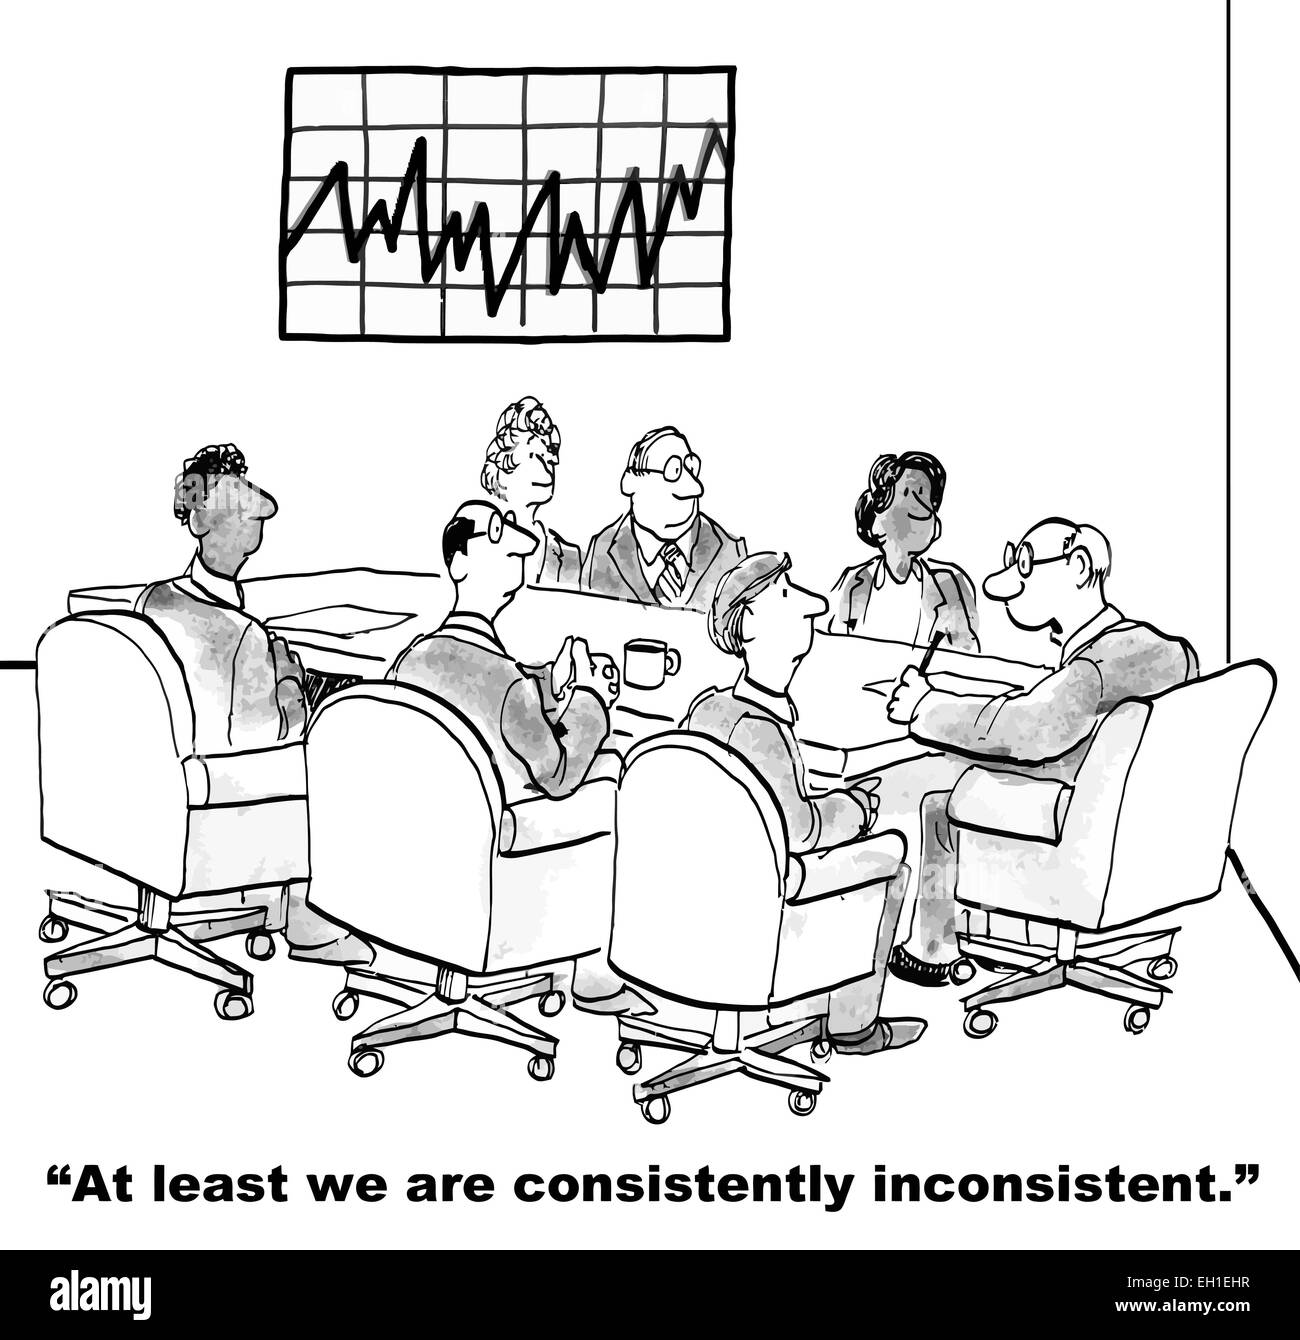 Cartoon of sales results chart and business meeting.  Business boss says, at least we are consistently inconsistent. Stock Vector